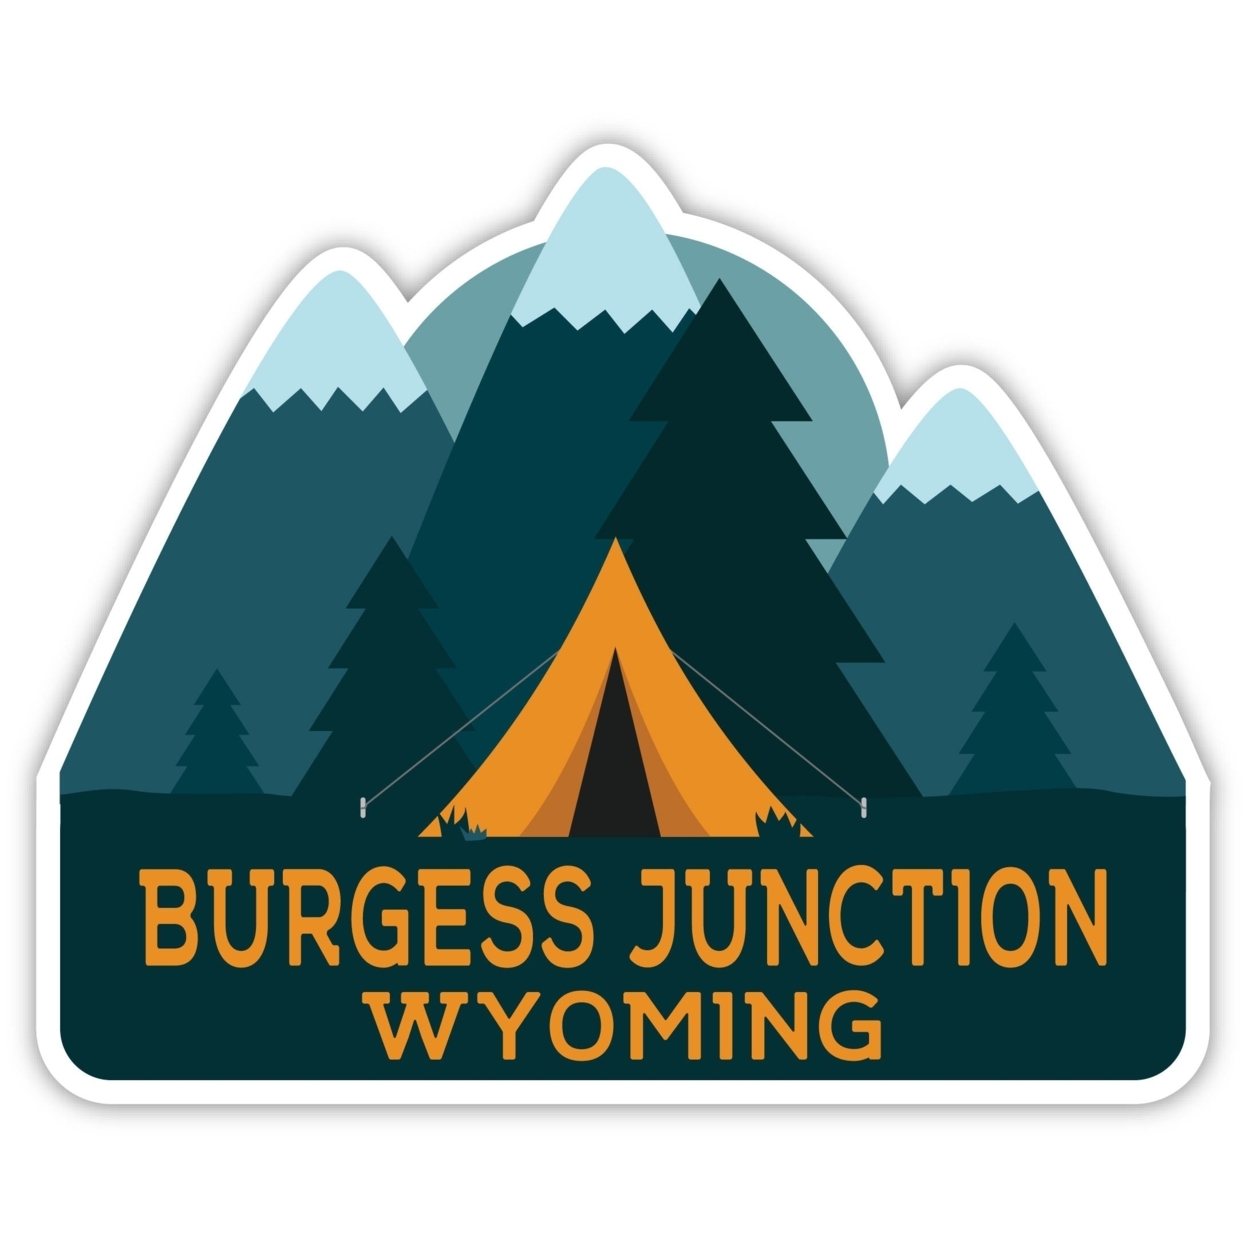 Burgess Junction Wyoming Souvenir Decorative Stickers (Choose Theme And Size) - 4-Pack, 8-Inch, Tent